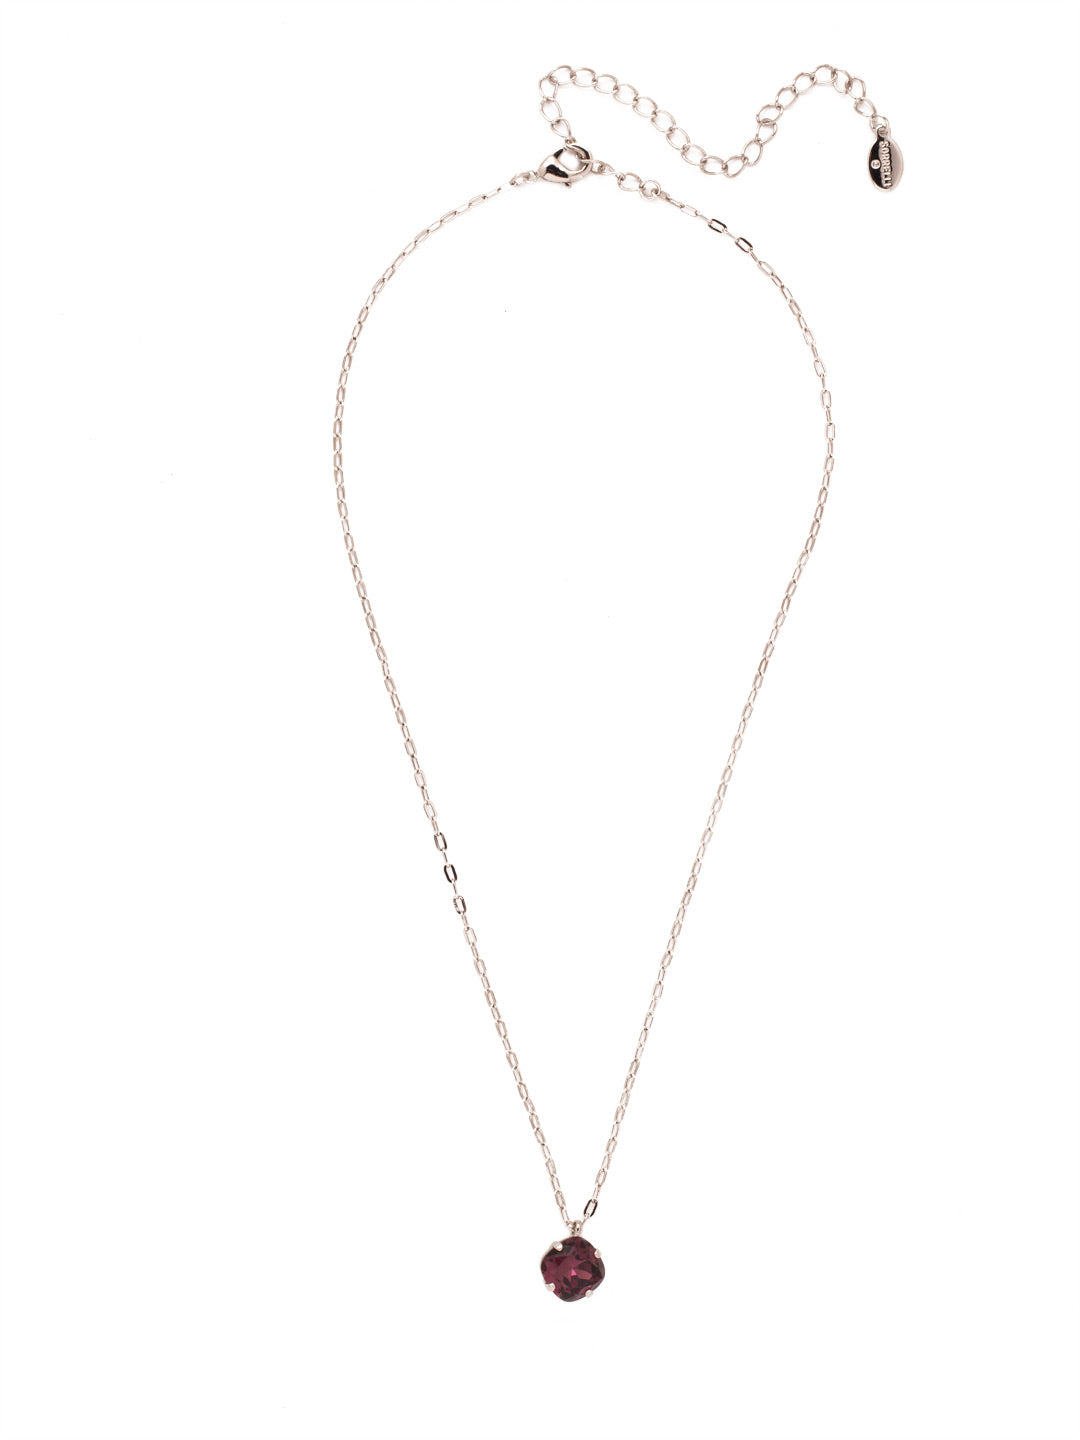 Siren Pendant Necklace - NEP22RHAM - With a cushion-cut crystal and delicate chain, the Siren Pendant  will add a litle sparkle to your everyday look. From Sorrelli's Amethyst collection in our Palladium Silver-tone finish.